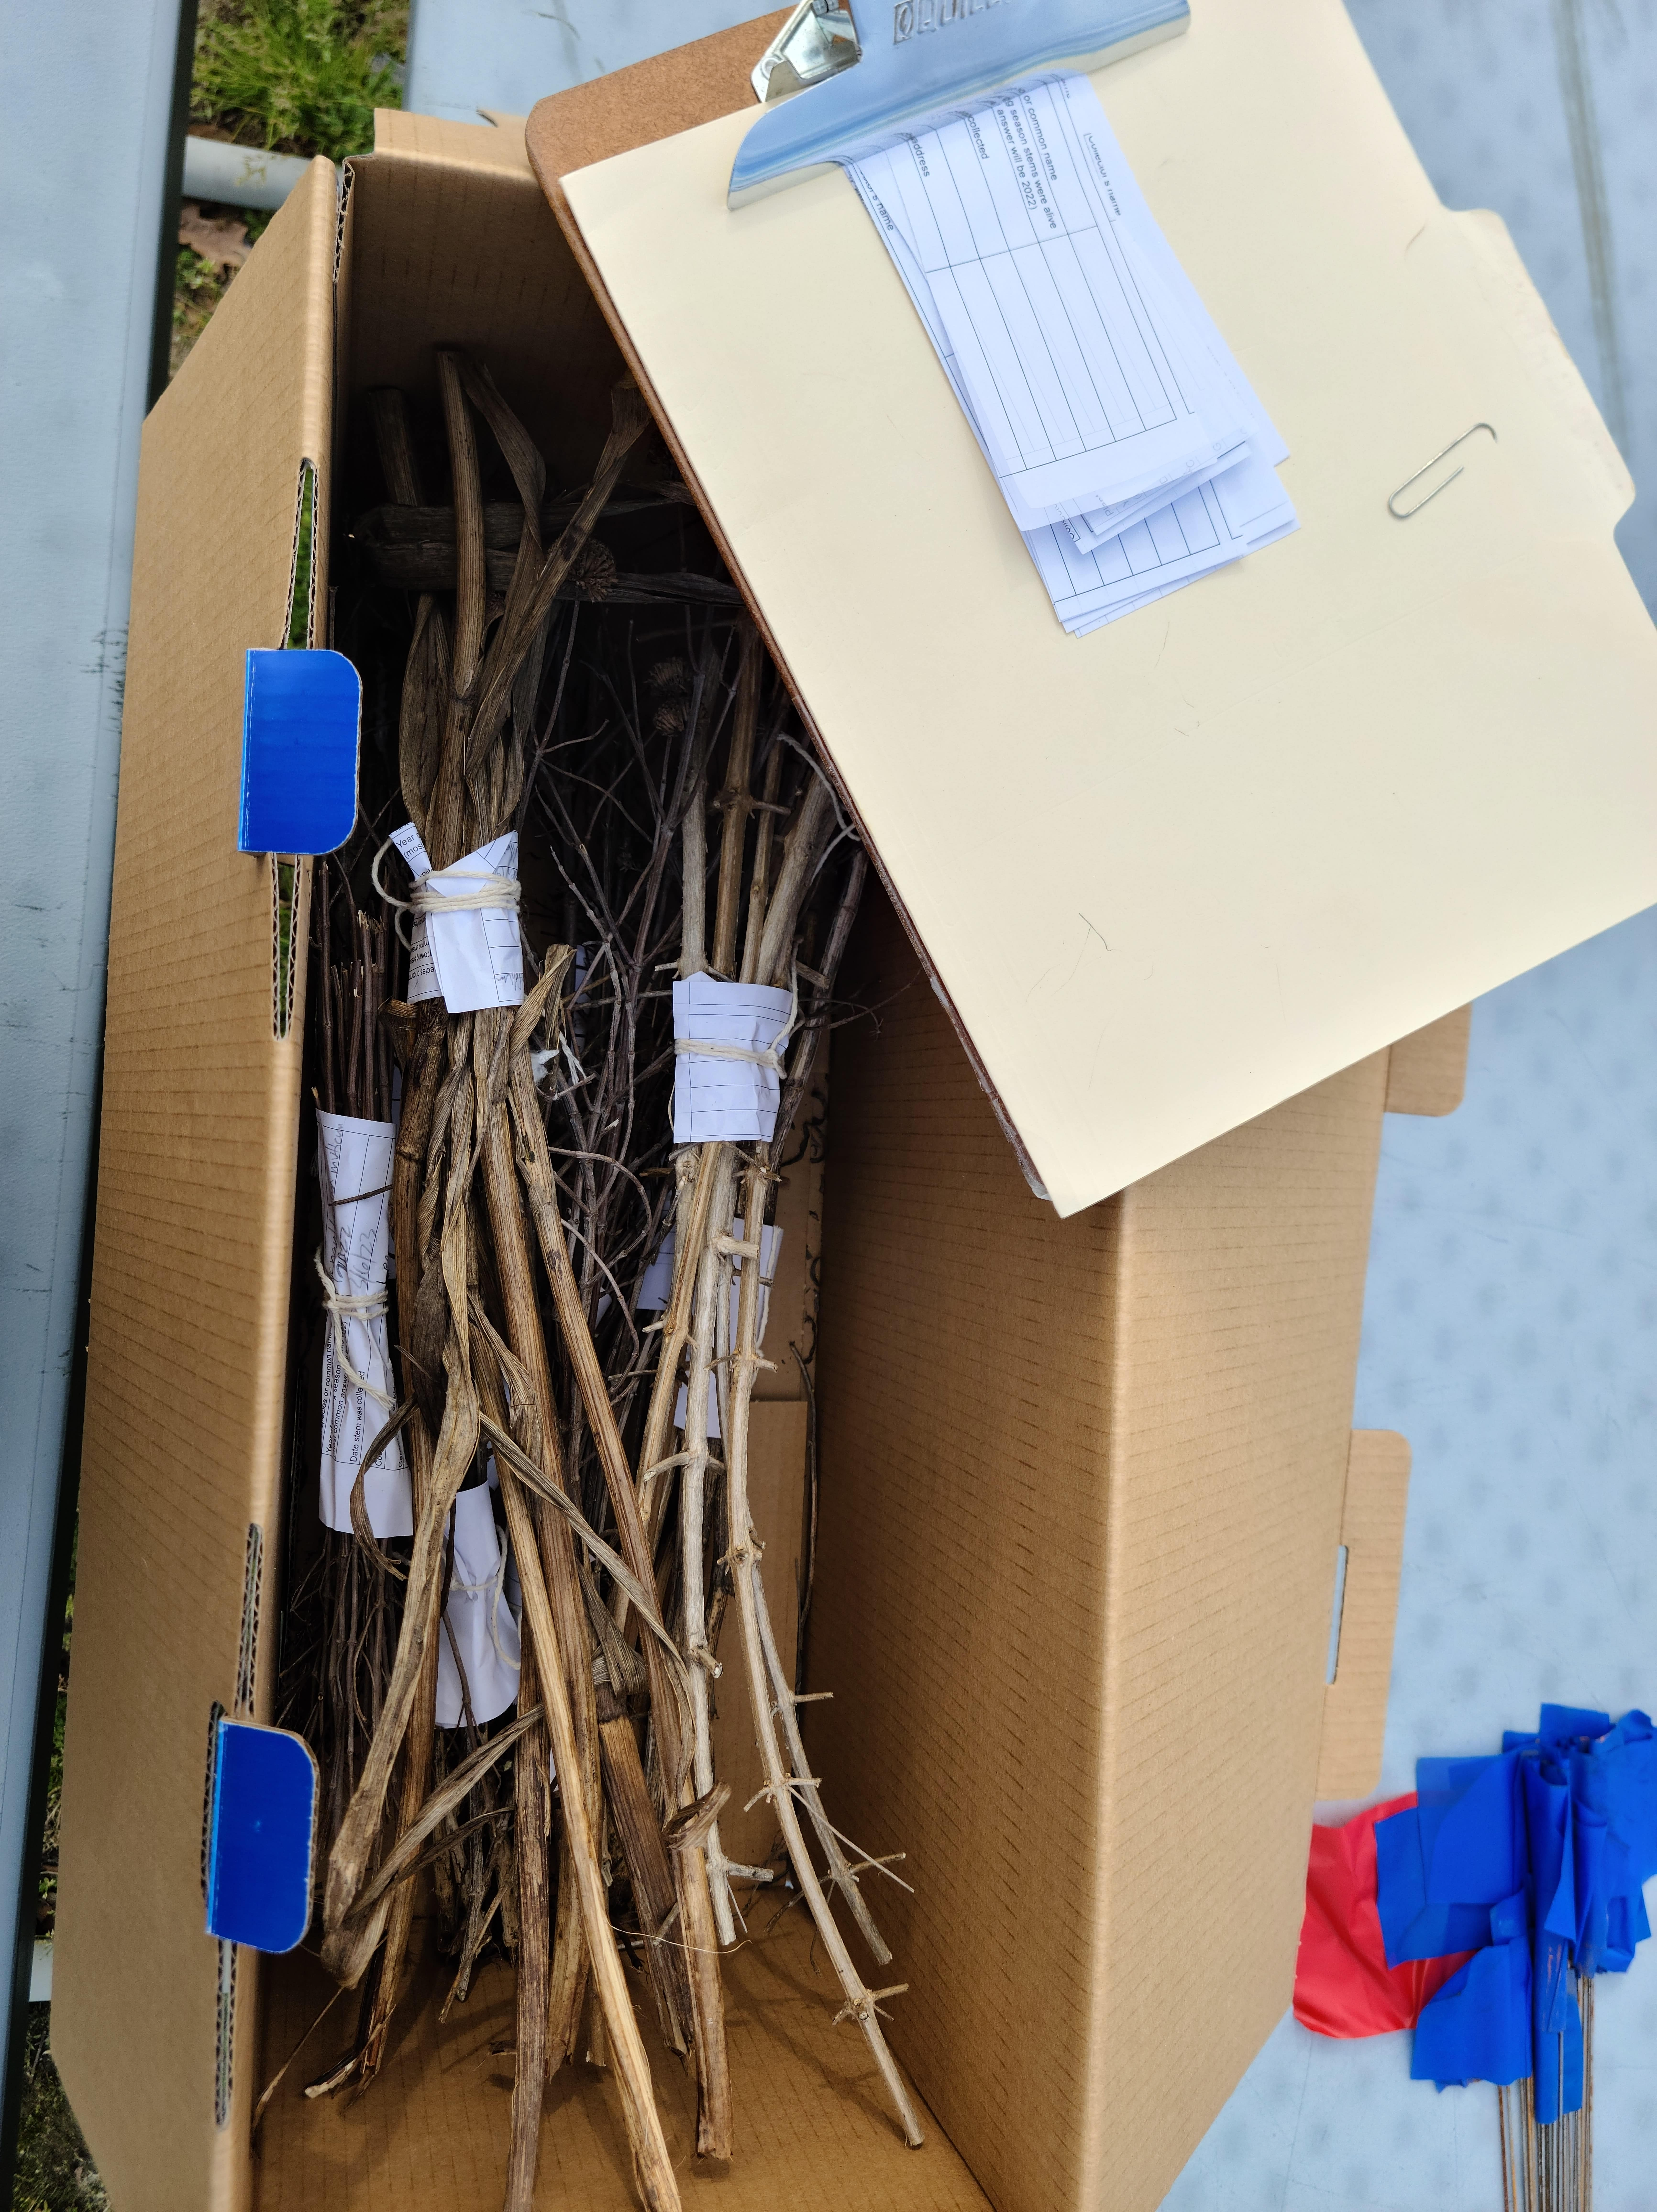 Box of Sticks for Pollinator Research